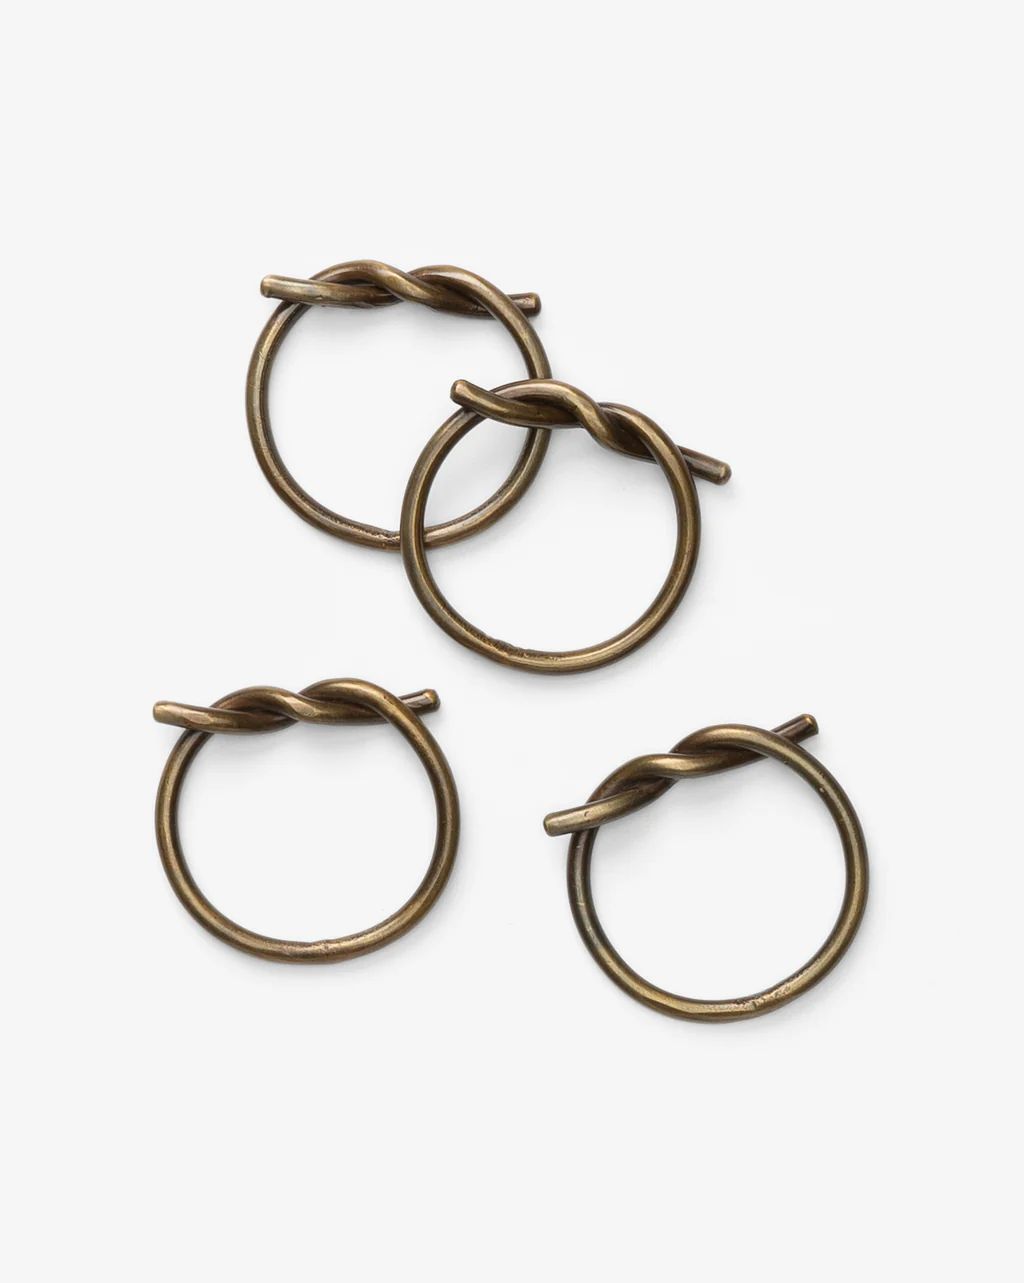 Ethan Napkin Rings (Set of 4) | McGee & Co.